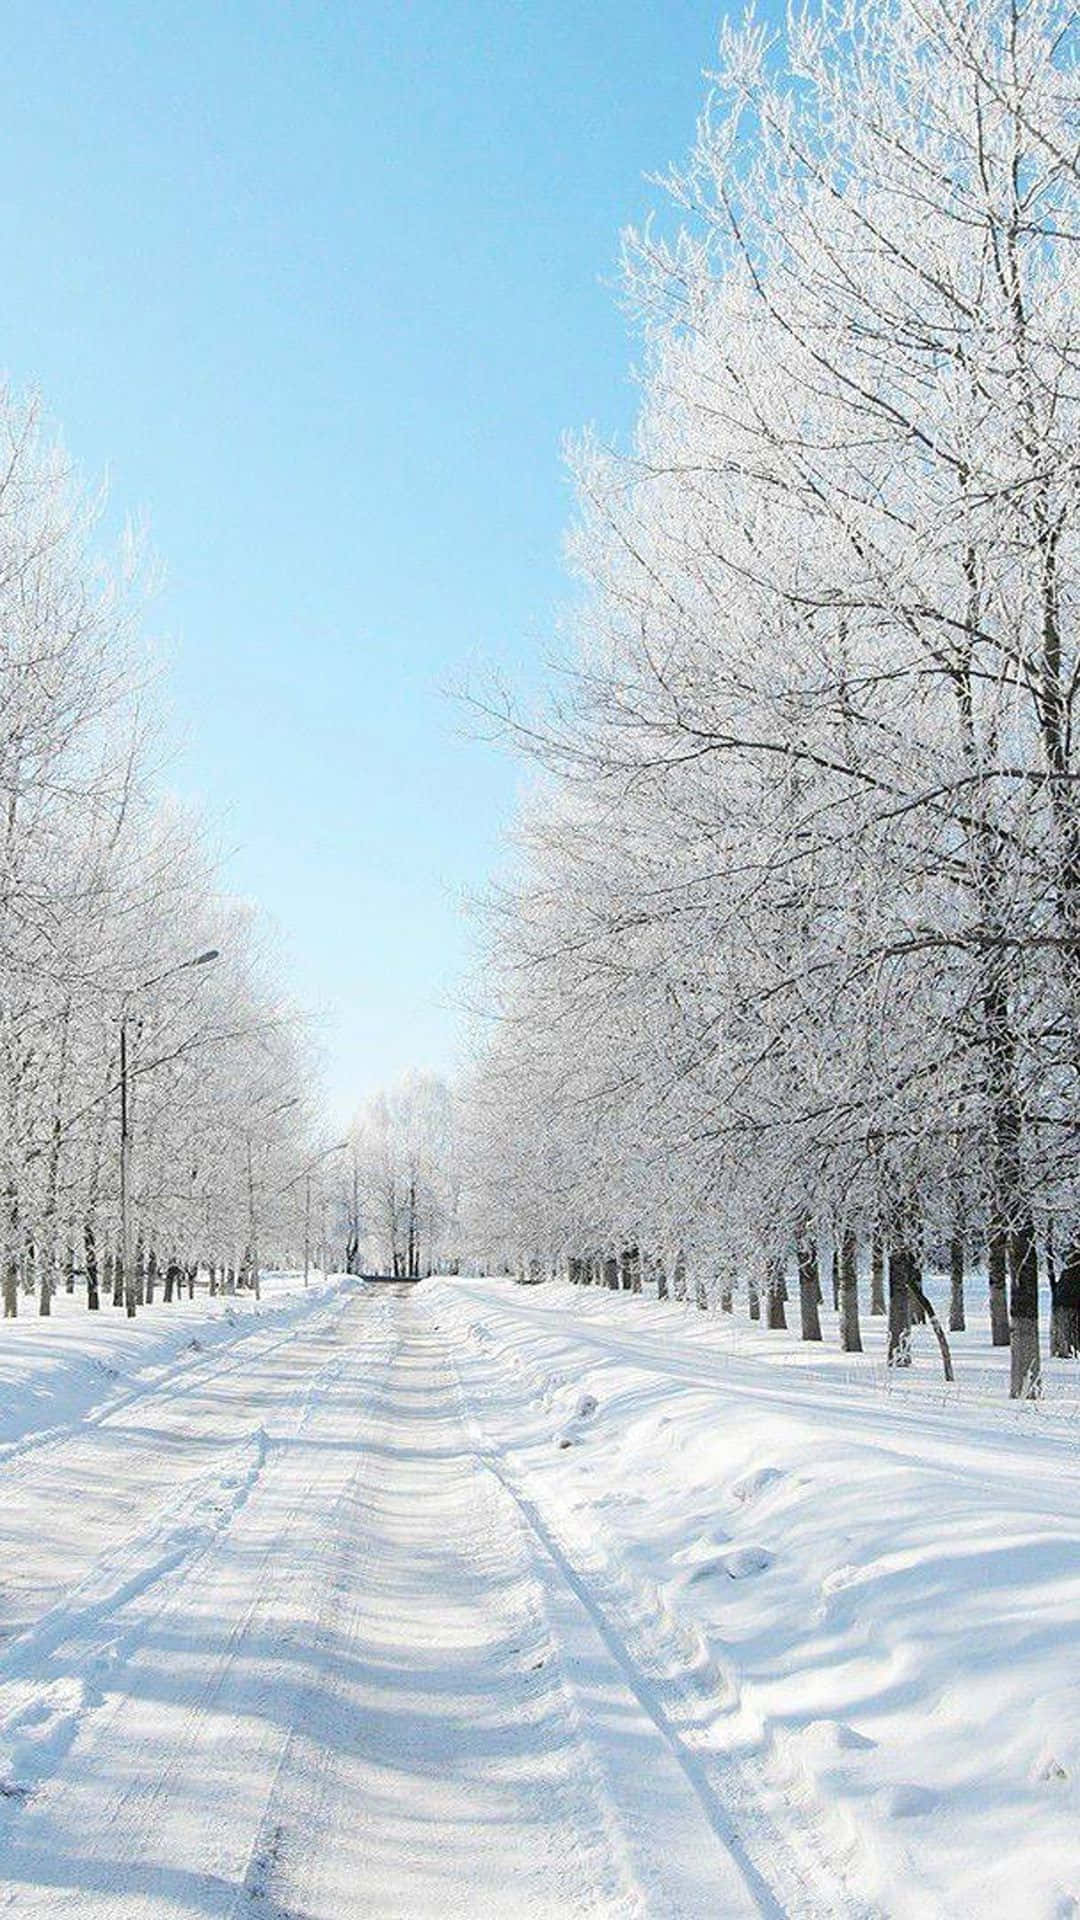 Download Embrace the beauty of a winter wonderland Wallpaper | Wallpapers .com